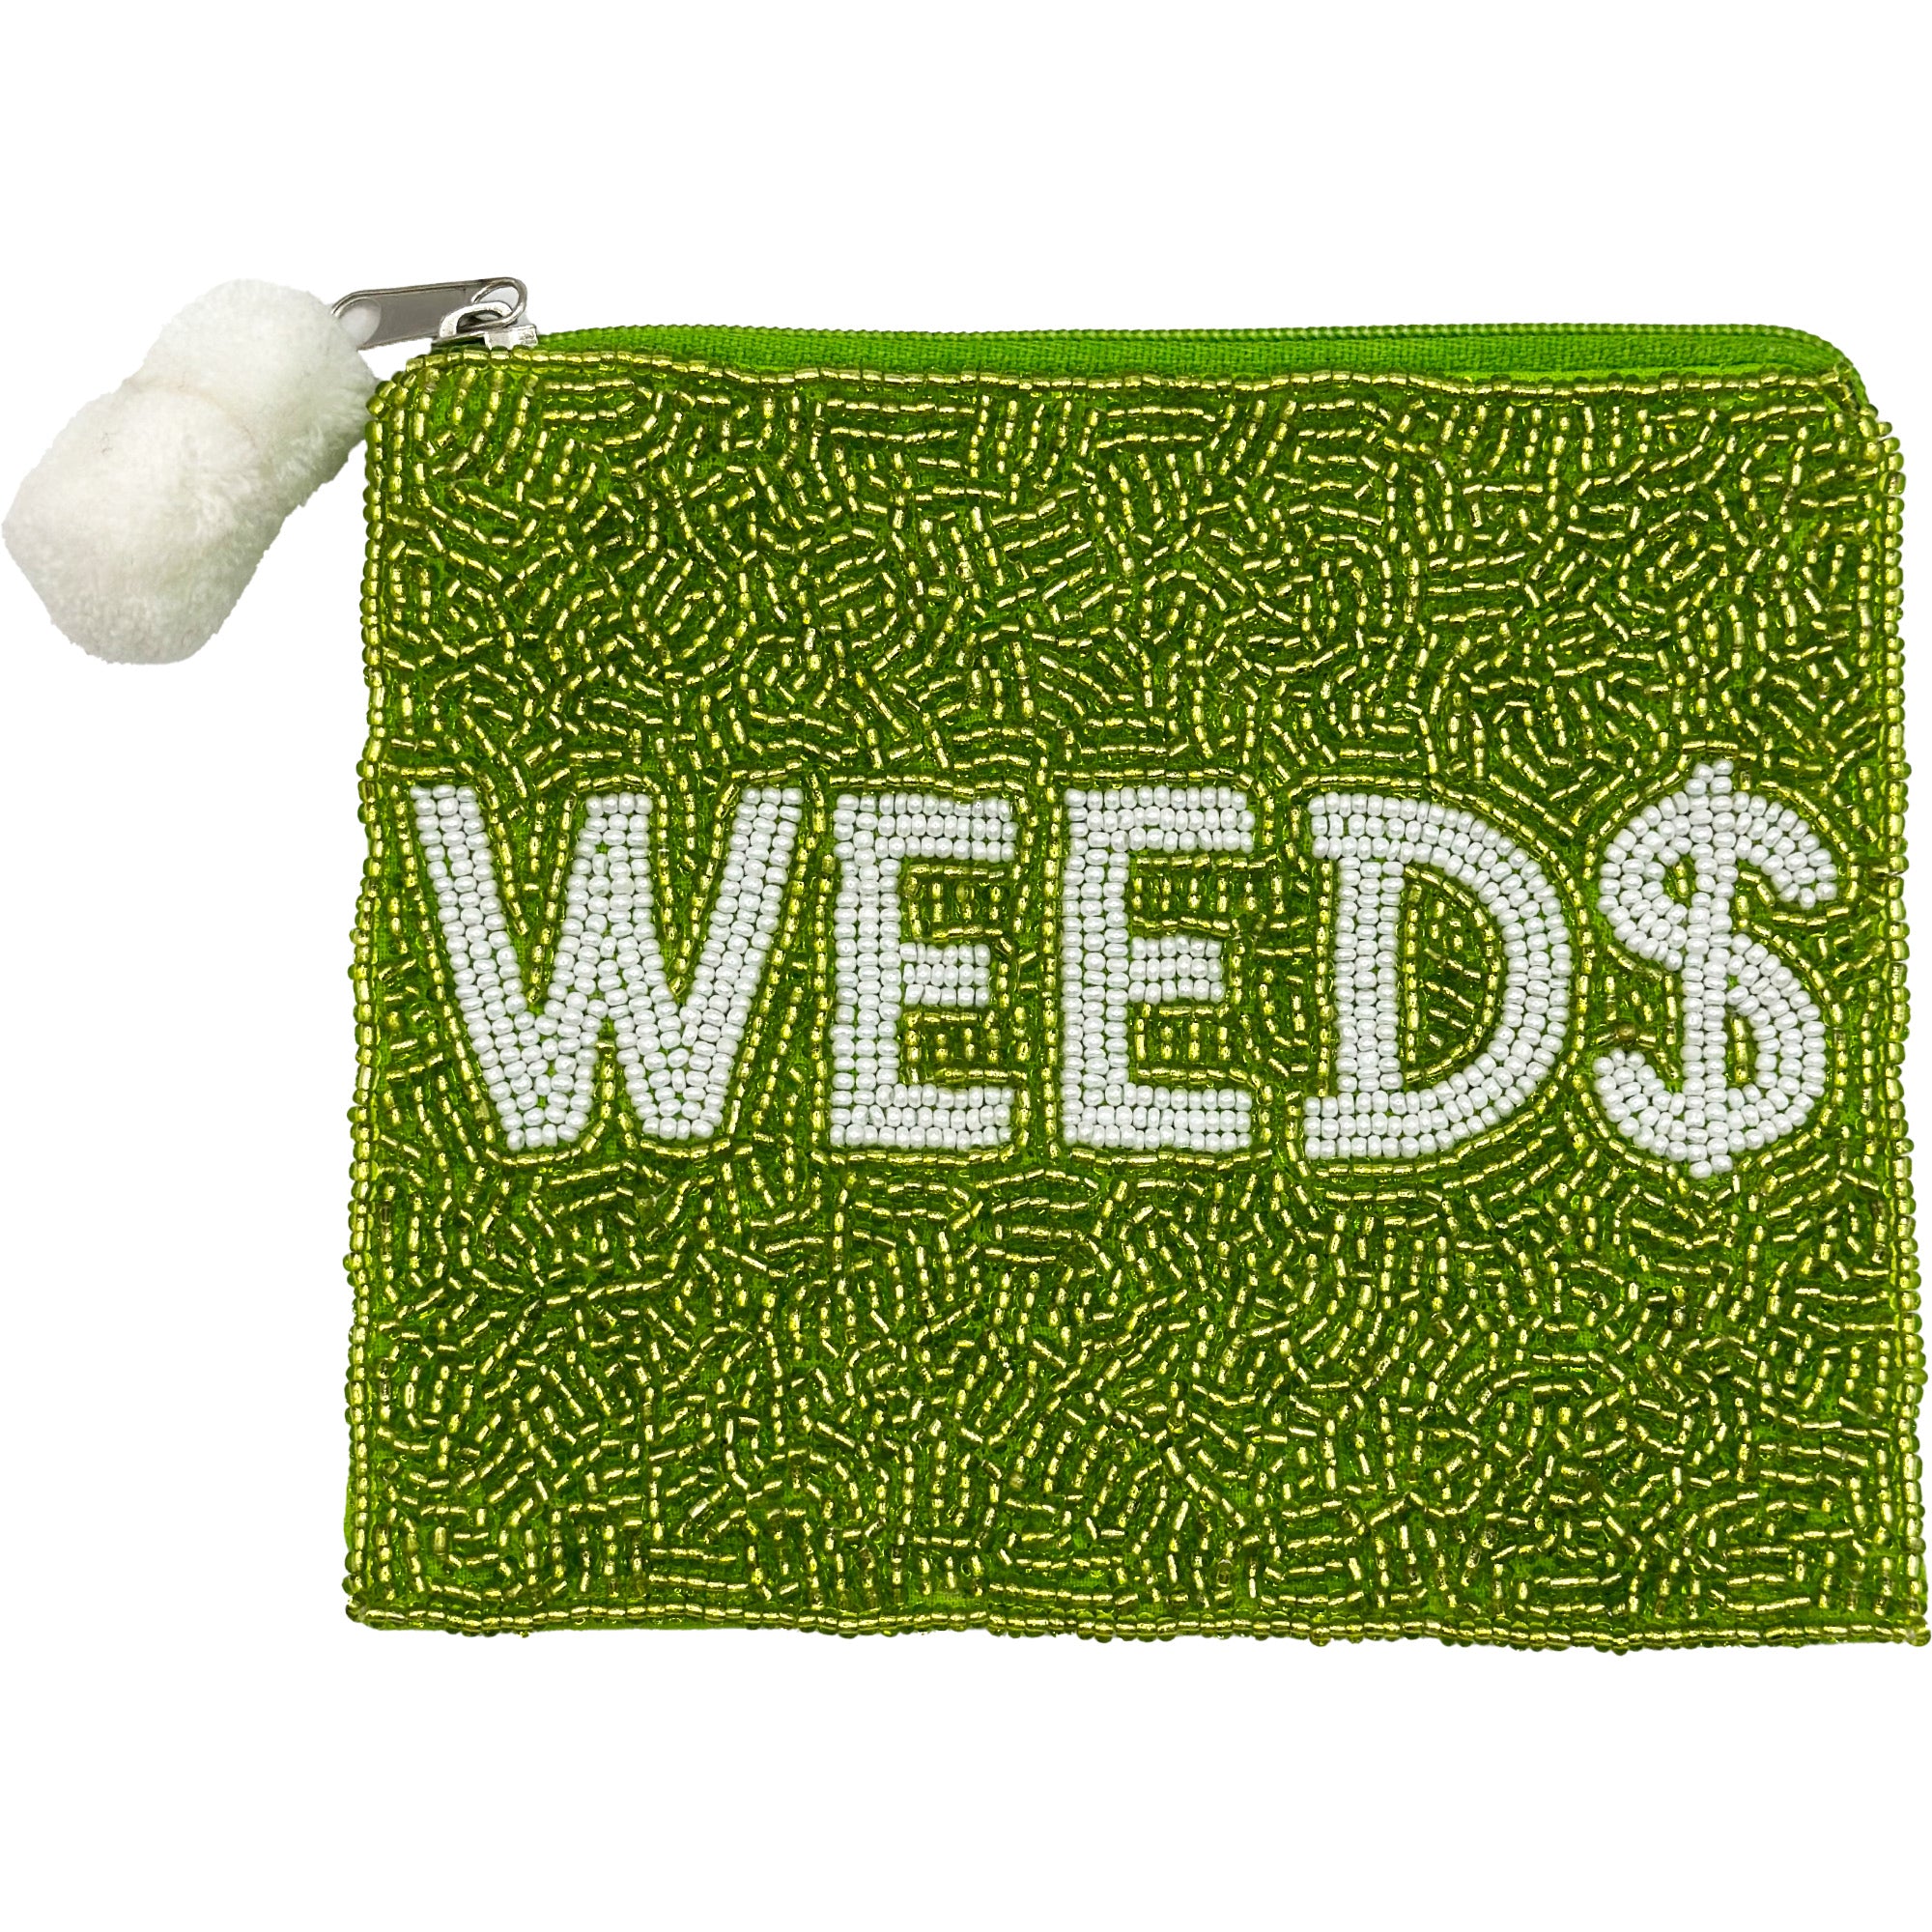 LA CHIC WEED $ BEADED POUCH